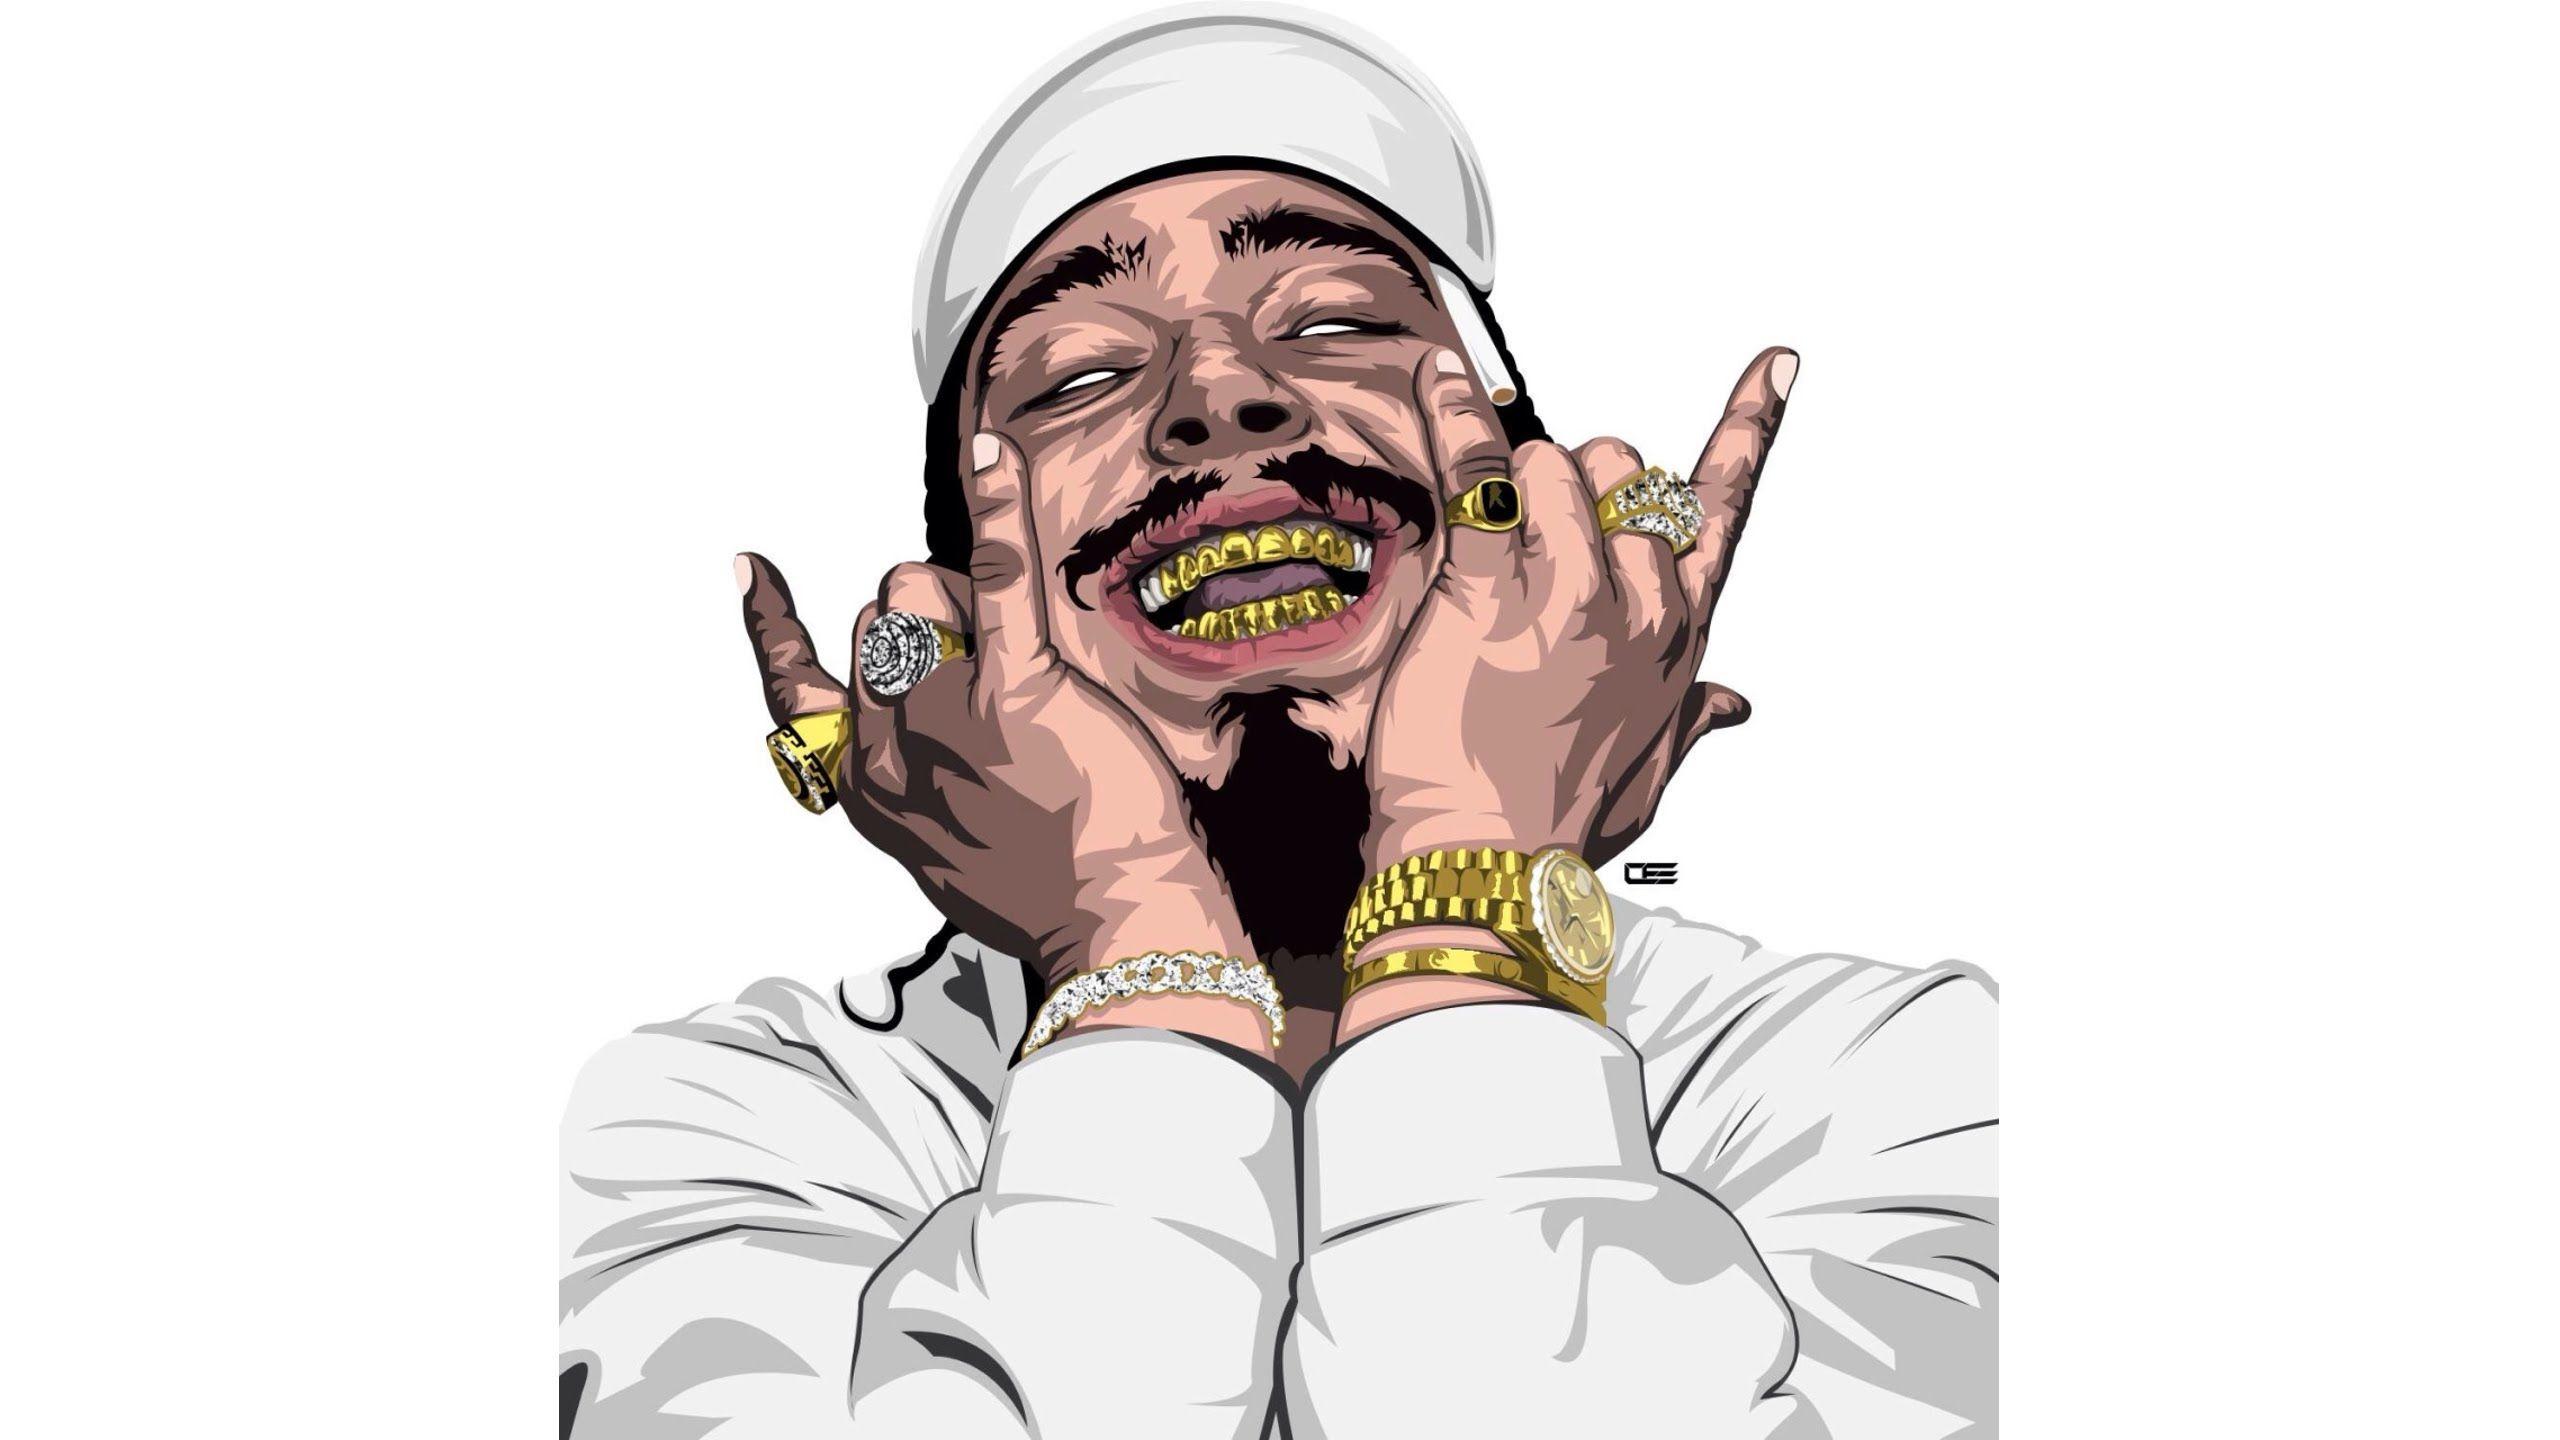 Post Malone Cartoon Wallpapers Top Free Post Malone Cartoon Backgrounds Wallpaperaccess